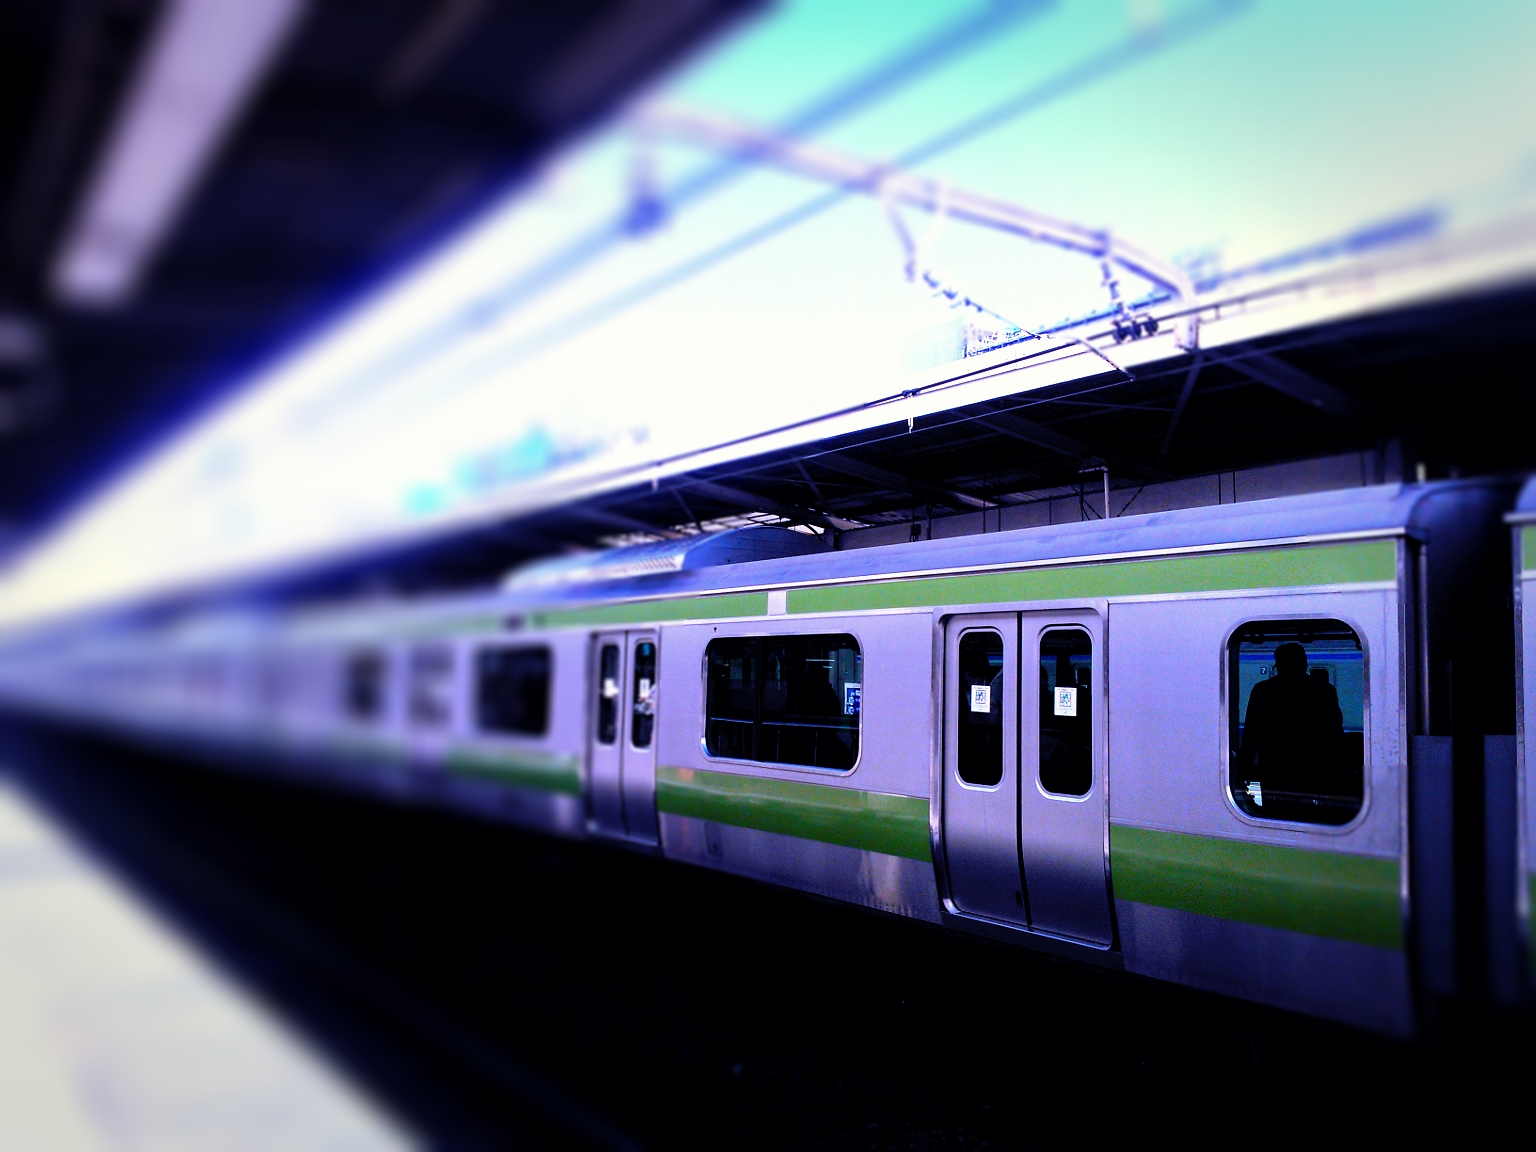 Yamanote line trains in Tokyo